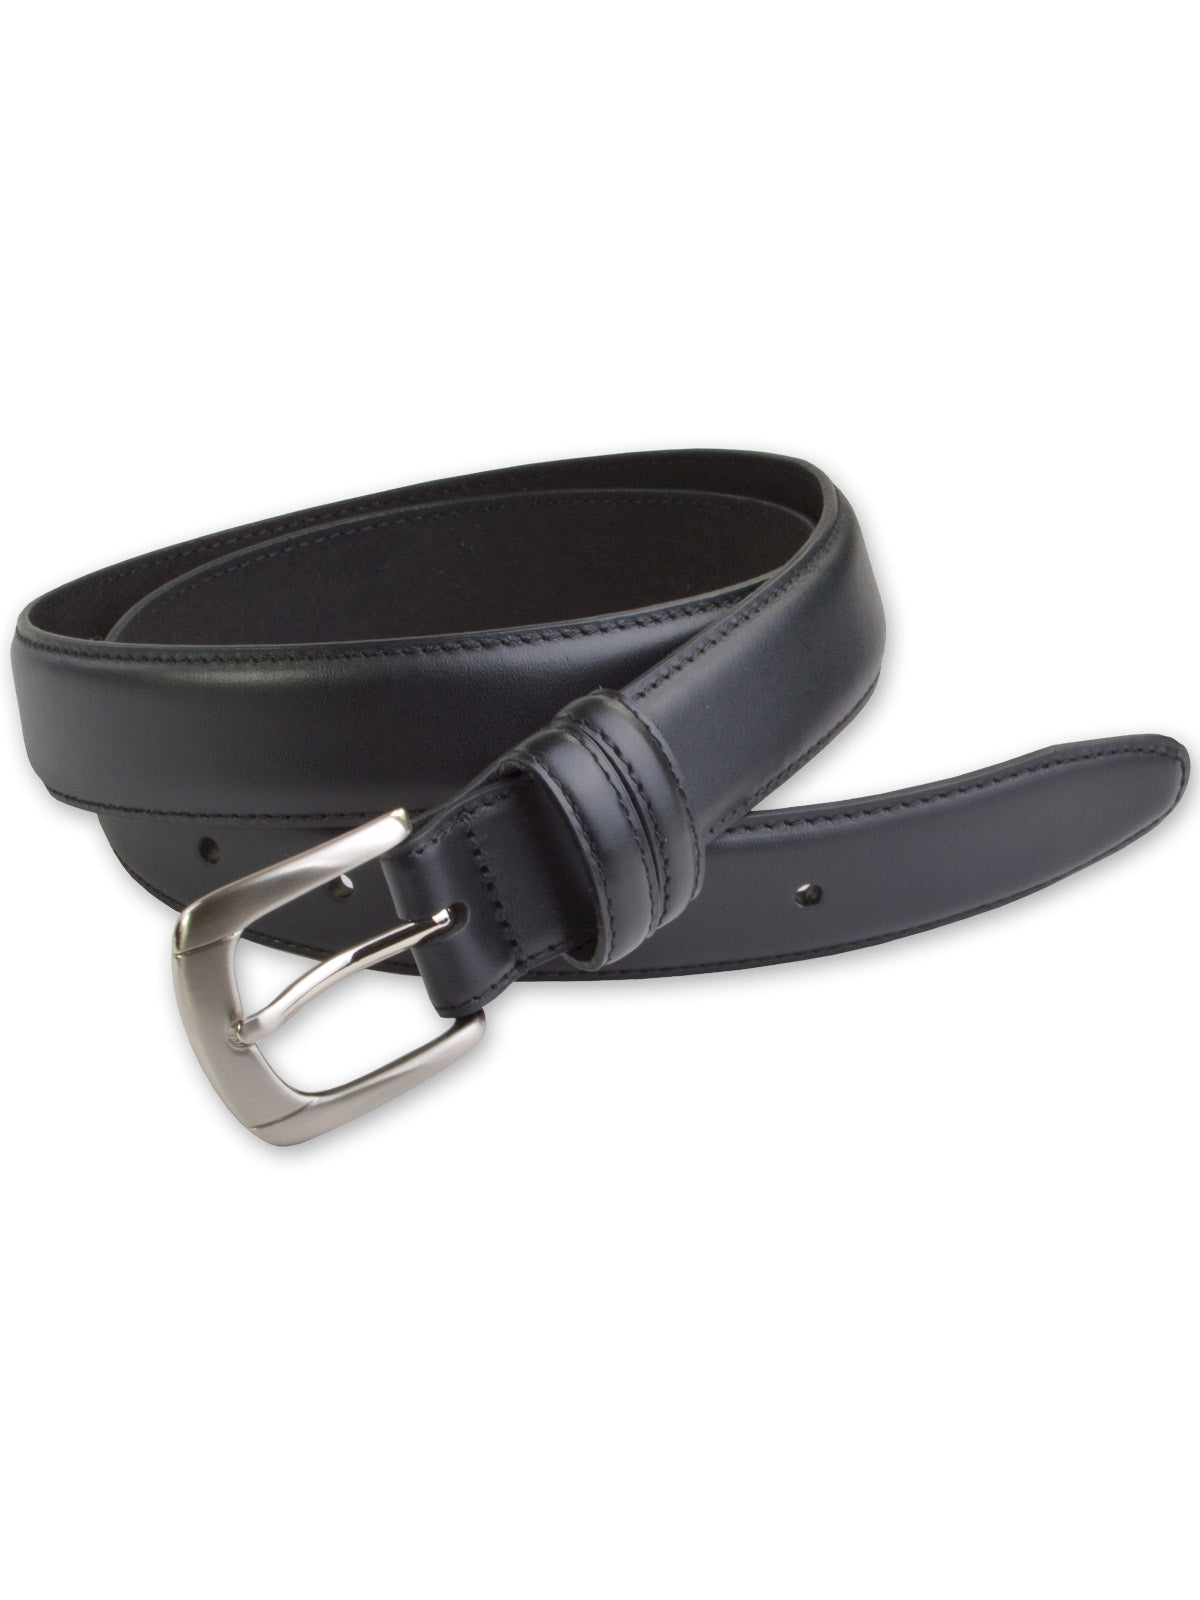 Marc Wolf Leather Dress Belts - Black with Silver Buckle 400SLV-B-BLK (44-54)